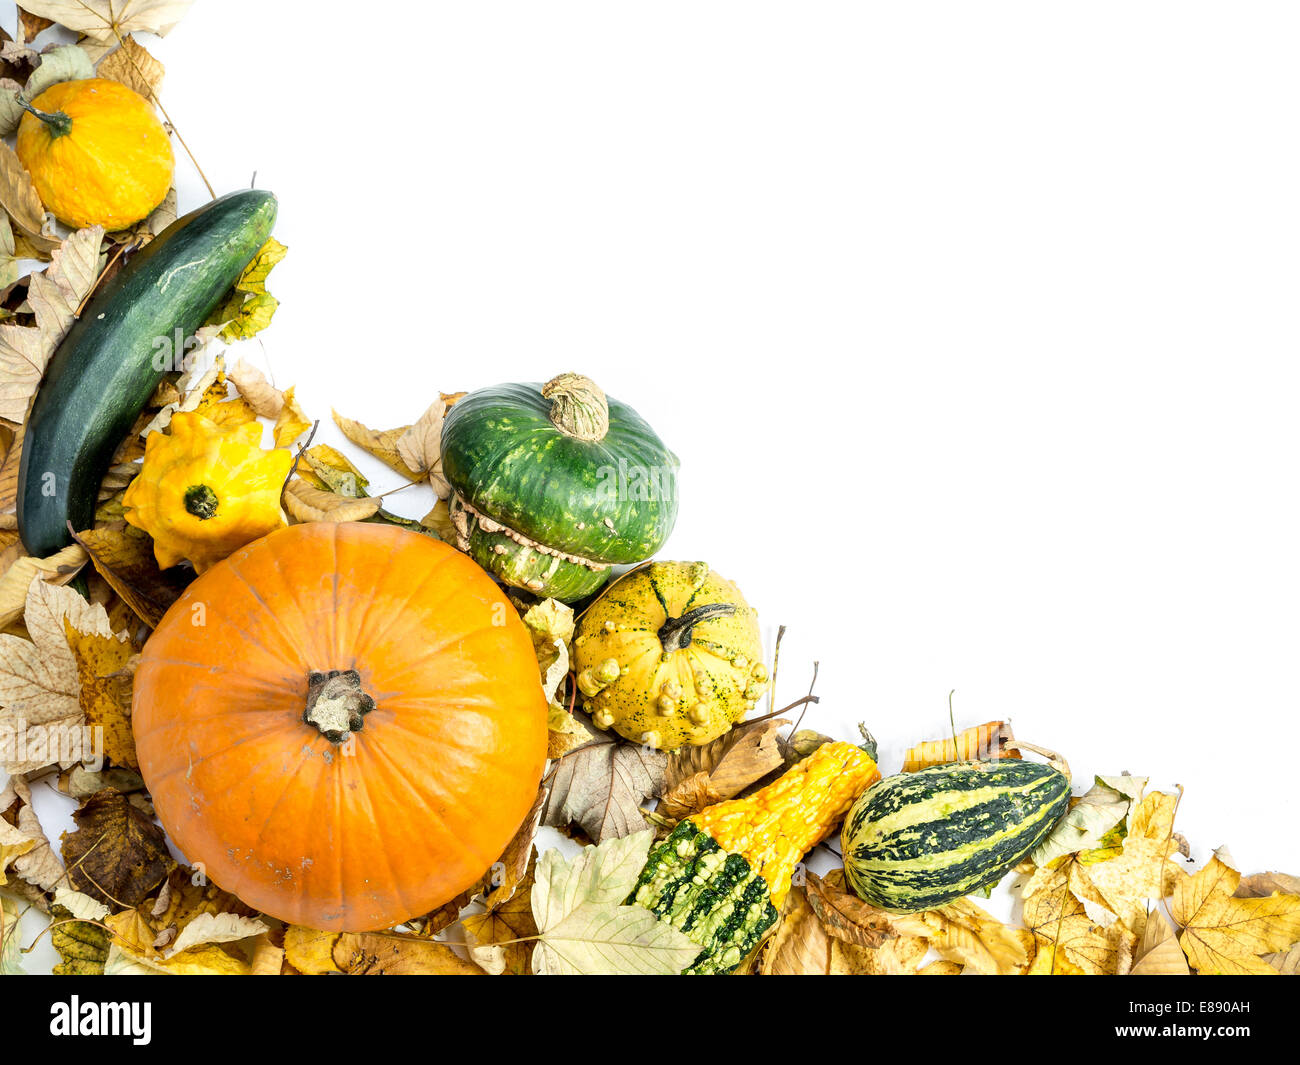 Composition of summer squashes, pumpkins and dead leaves with white space Stock Photo